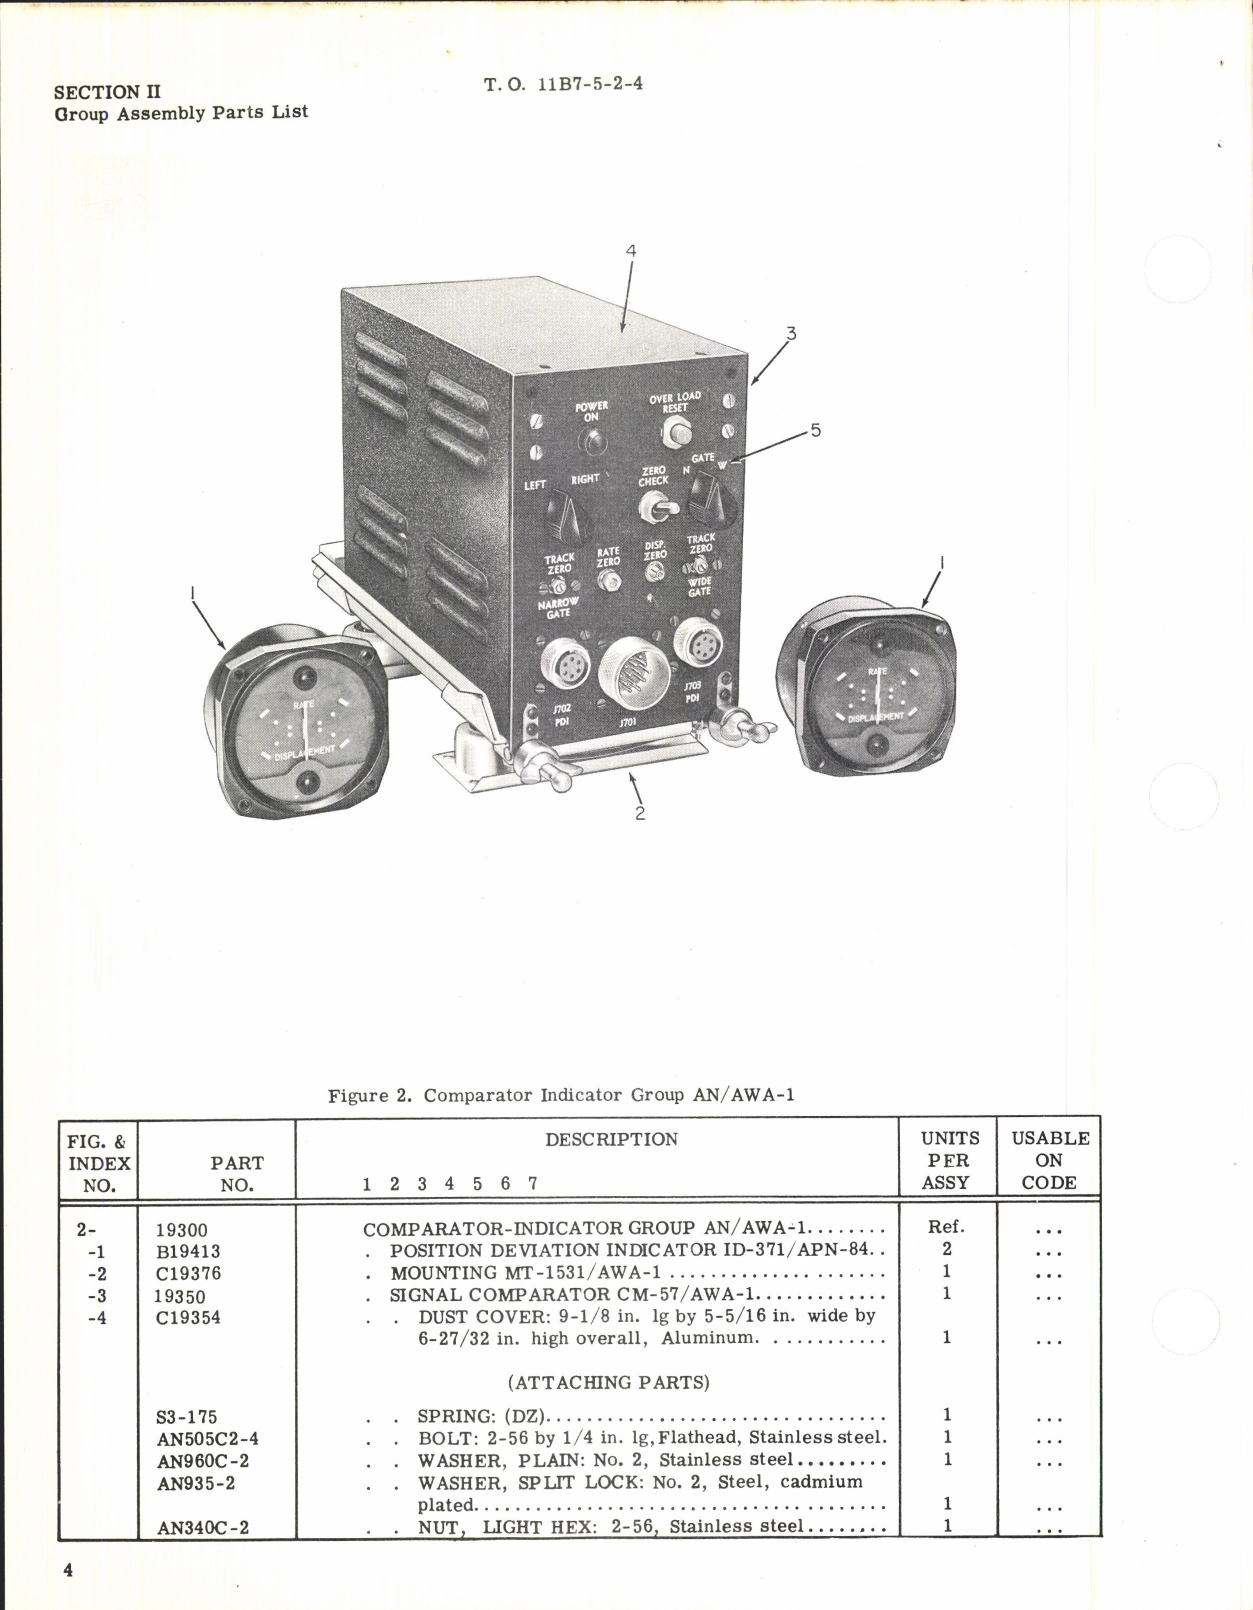 Sample page 8 from AirCorps Library document: Illustrated Parts Breakdown for Comparator Indicator Group AN/AWA-1